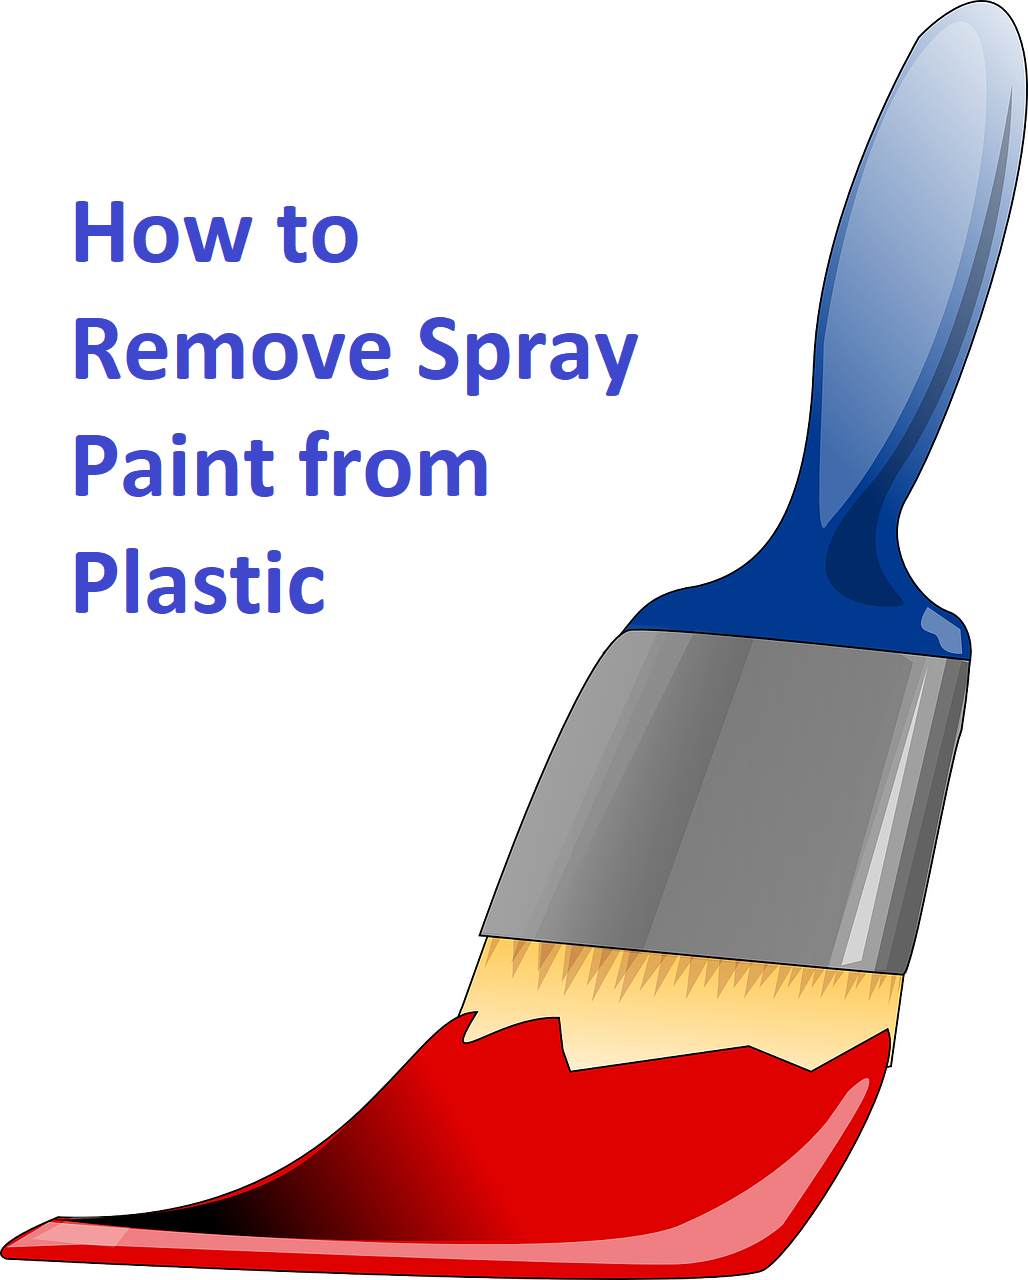 How to Remove Spray Paint from Plastic